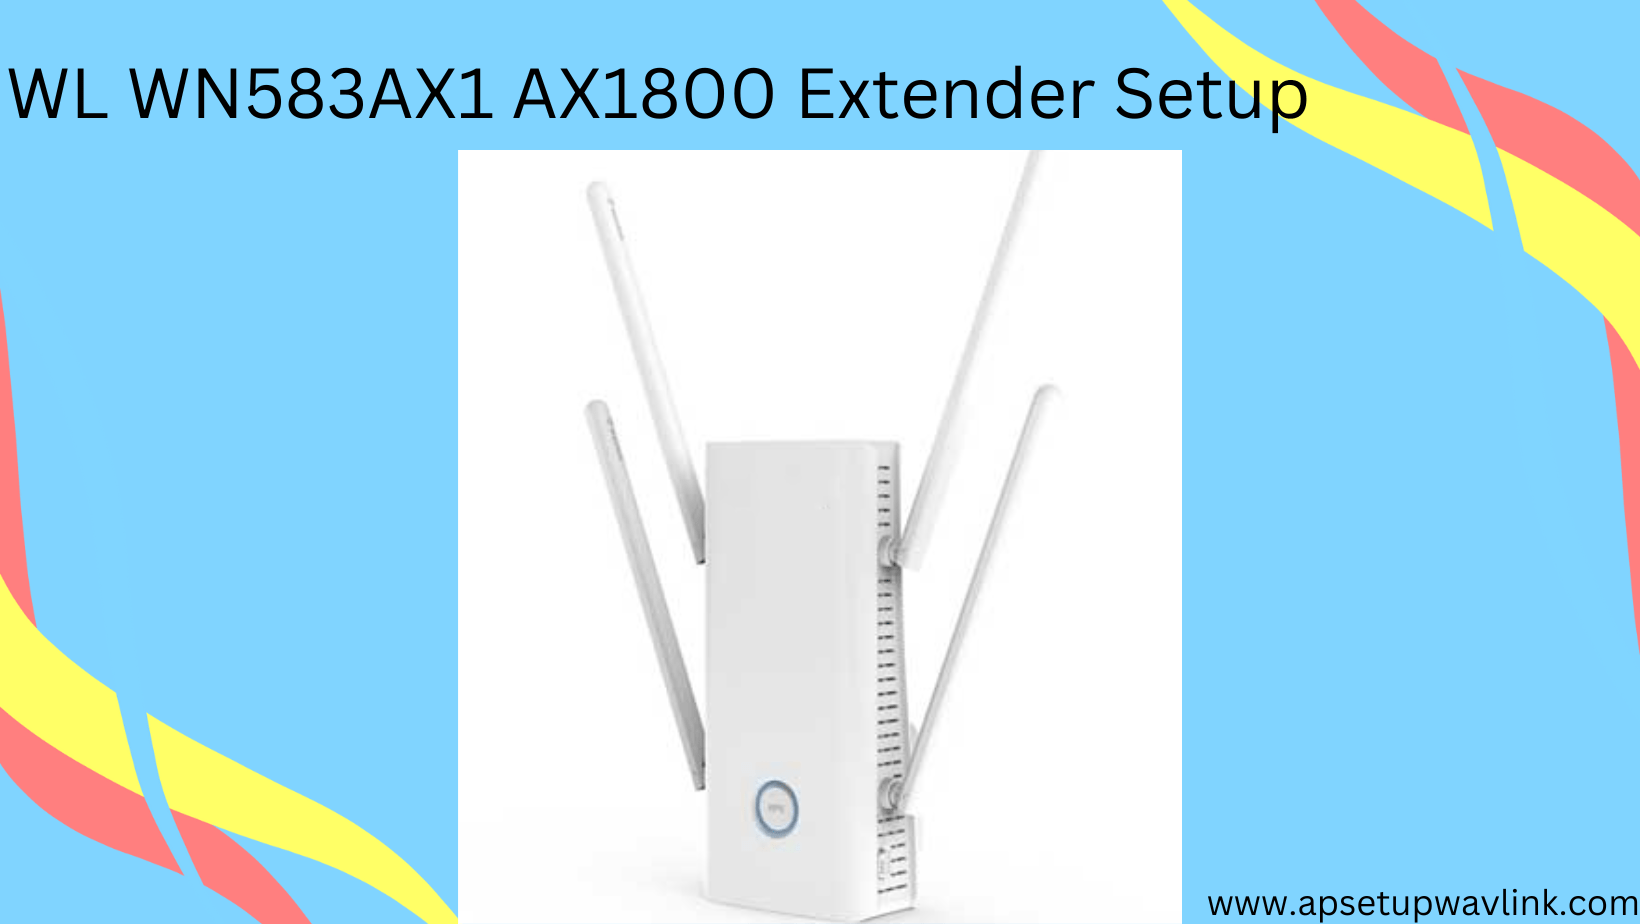 You are currently viewing WL WN583AX1 AX1800 Extender Setup